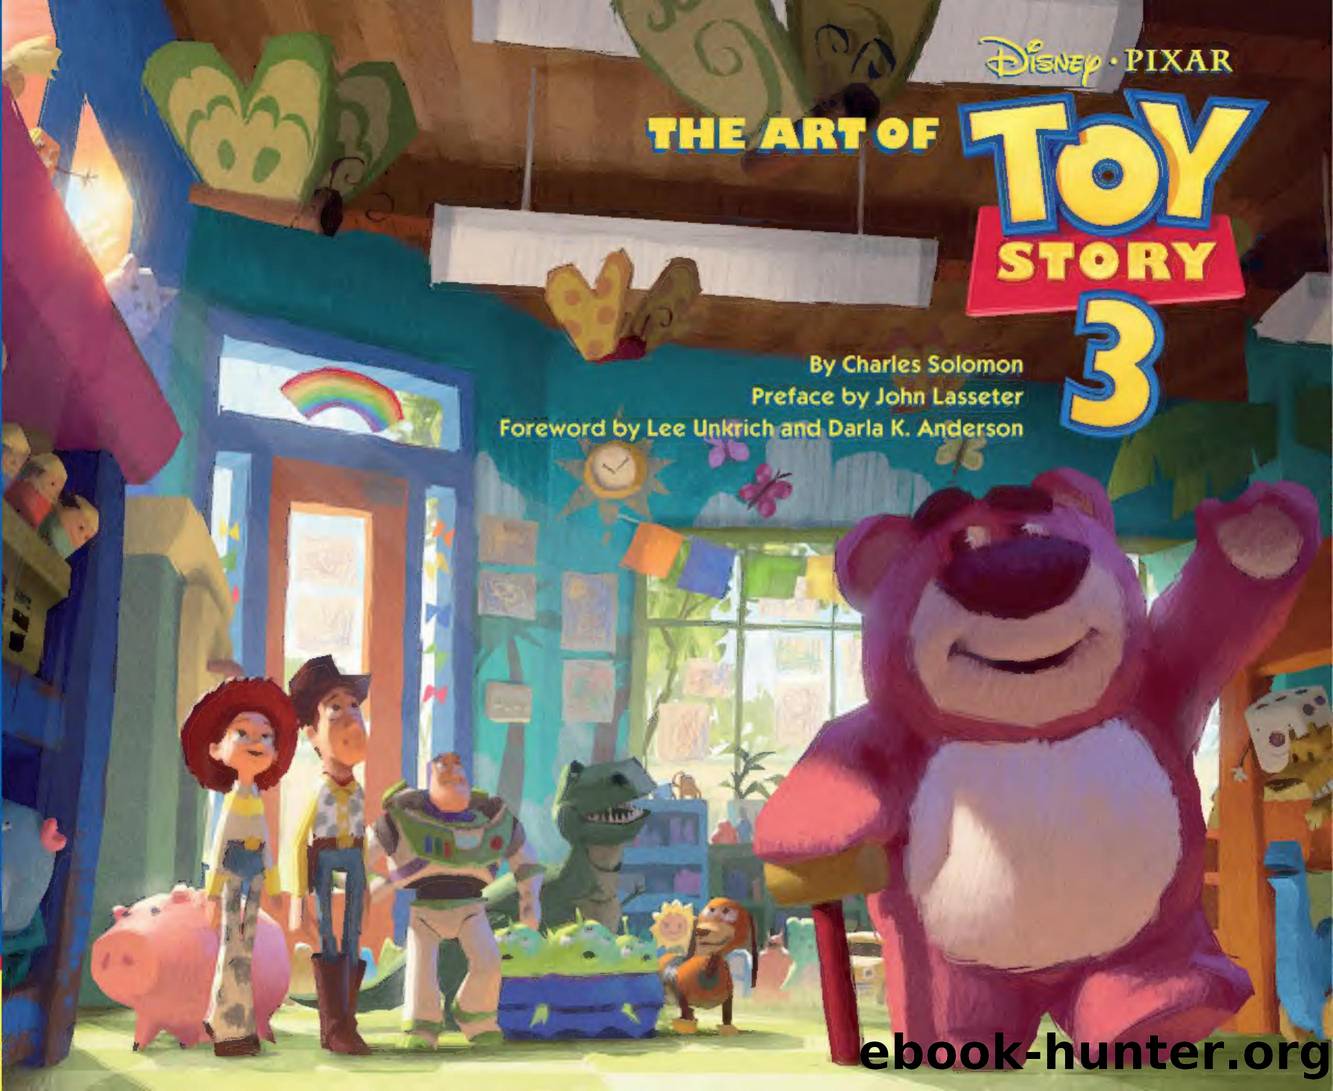 The Art Of Toy Story 3 by Charles Solomon